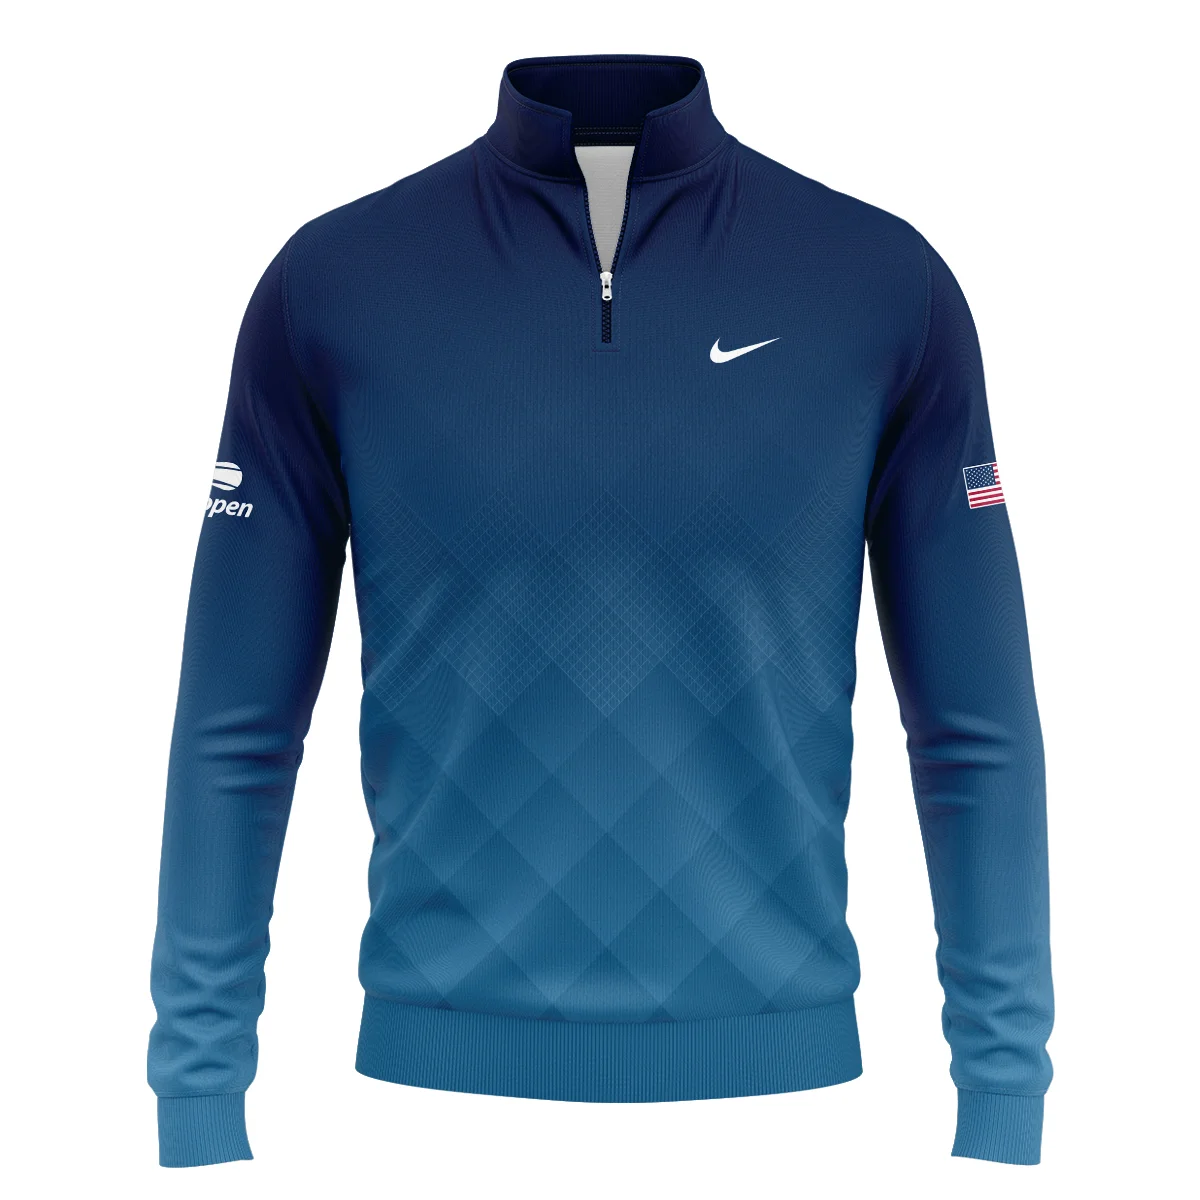 Nike Blue Abstract Background US Open Tennis Champions Zipper Polo Shirt Style Classic Zipper Polo Shirt For Men